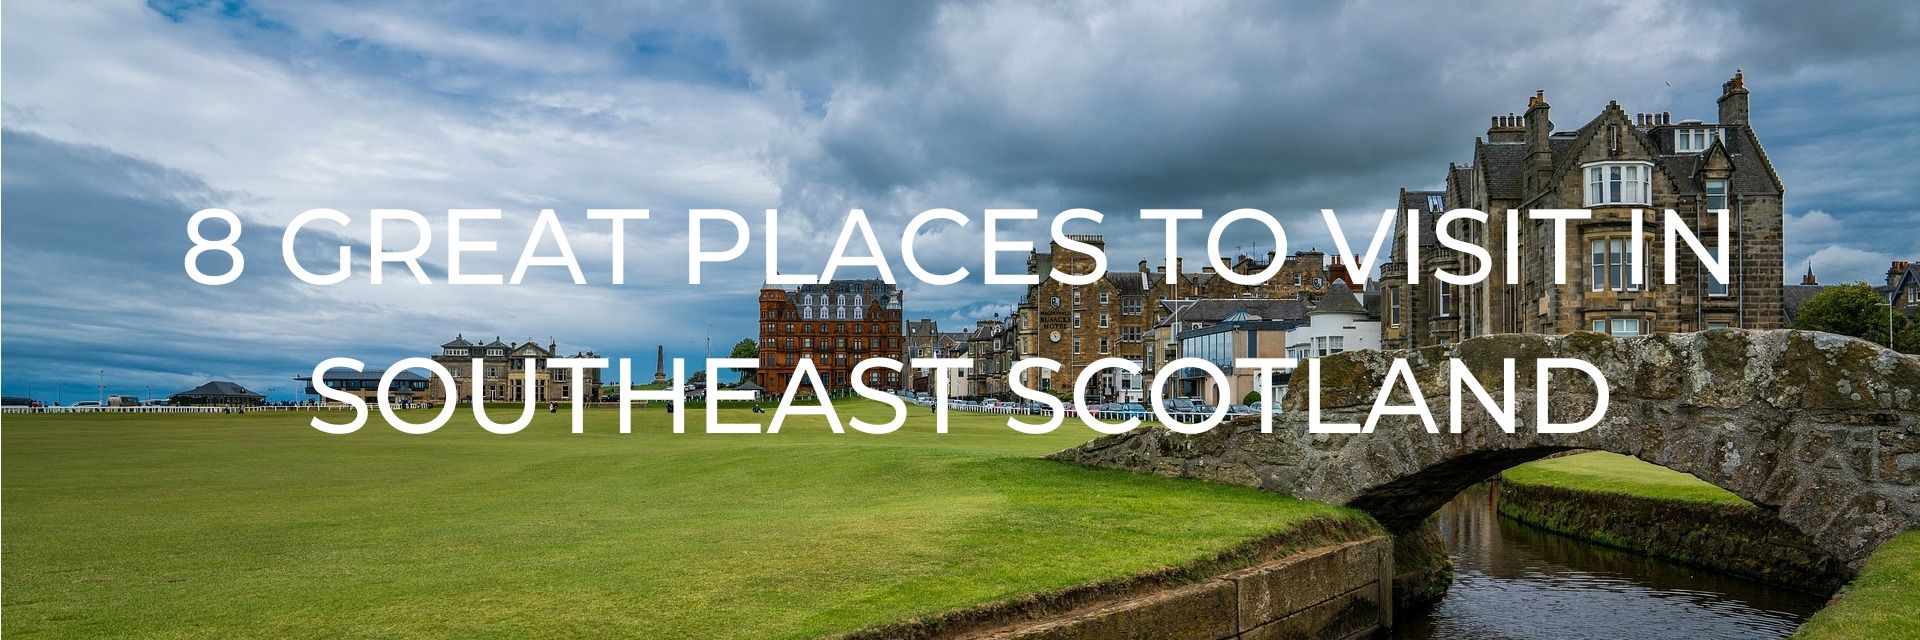 8 Great Places to Visit in Southeast Scotland Desktop Header